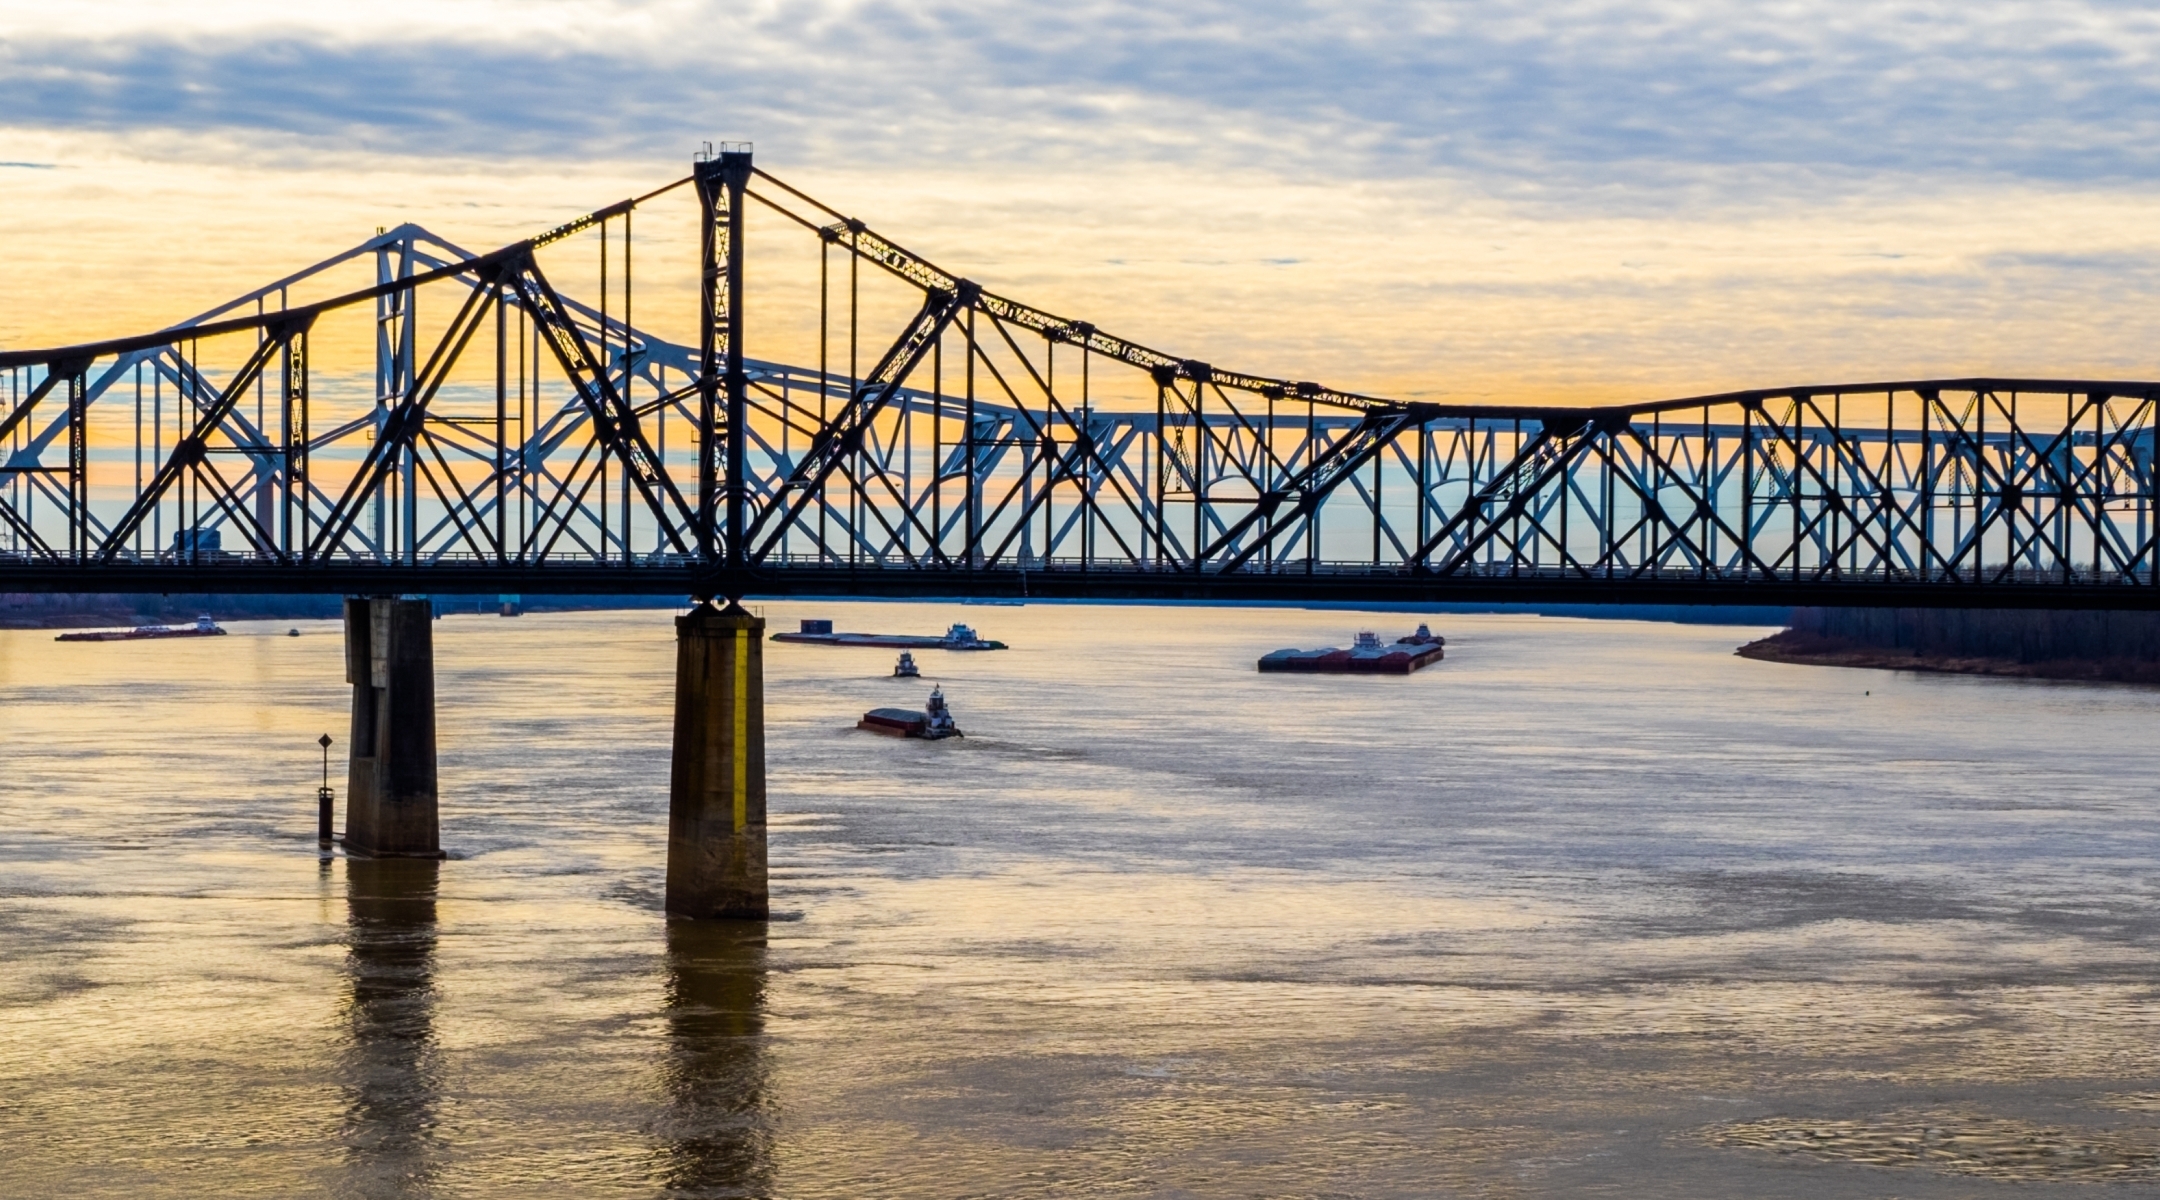 Evening view of a bridge across a river in Mississippi